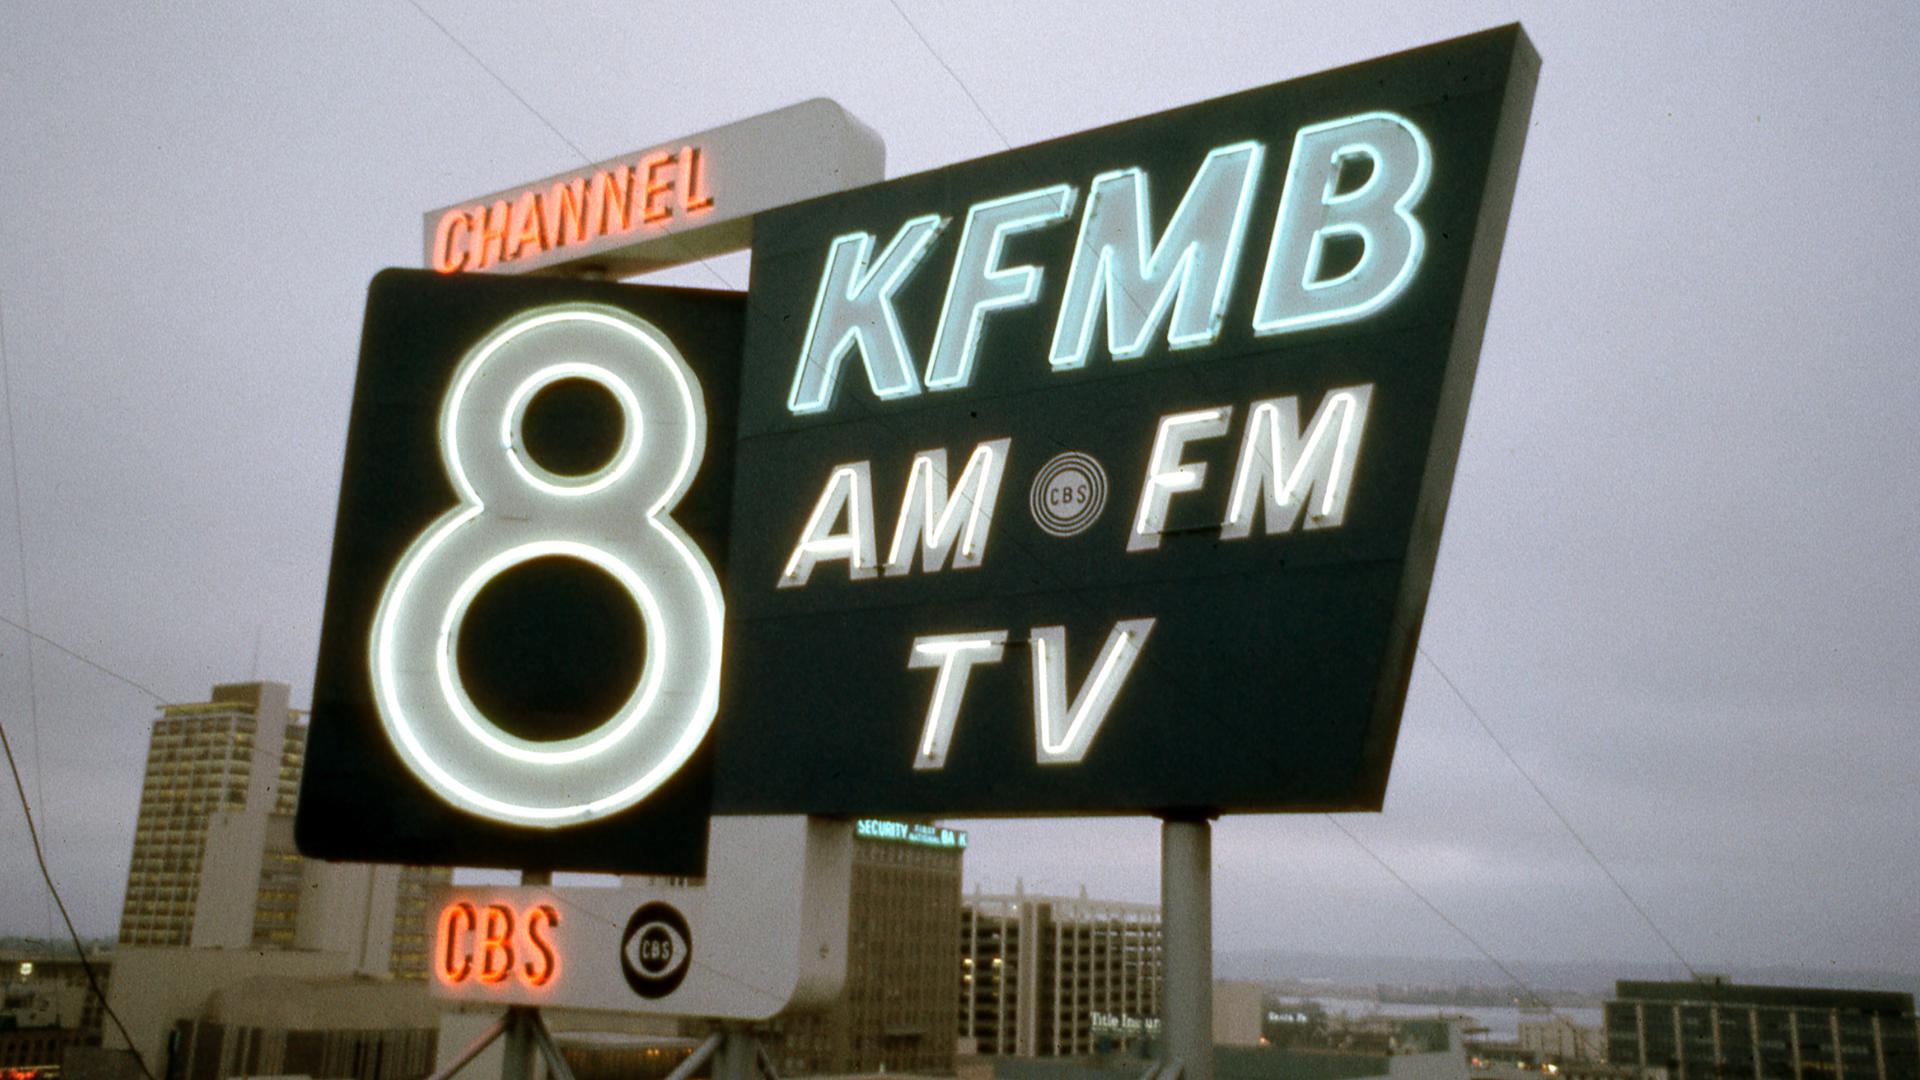 KFMB-TV/CBS 8 was the first TV station to broadcast in San Diego on May 16, 1949.